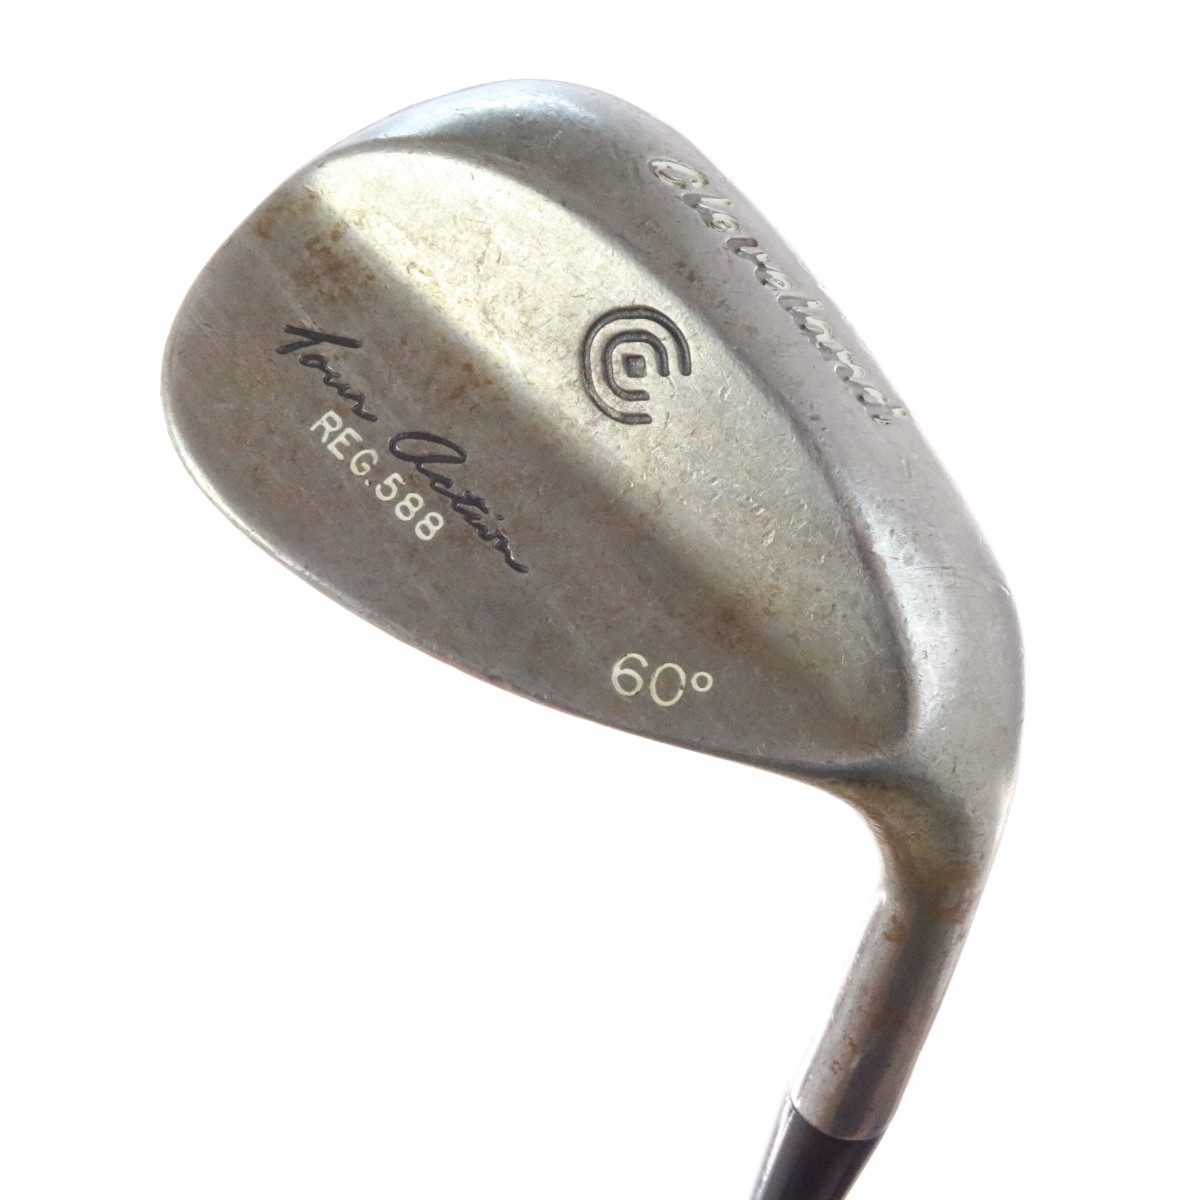 cleveland wedge tour action 588